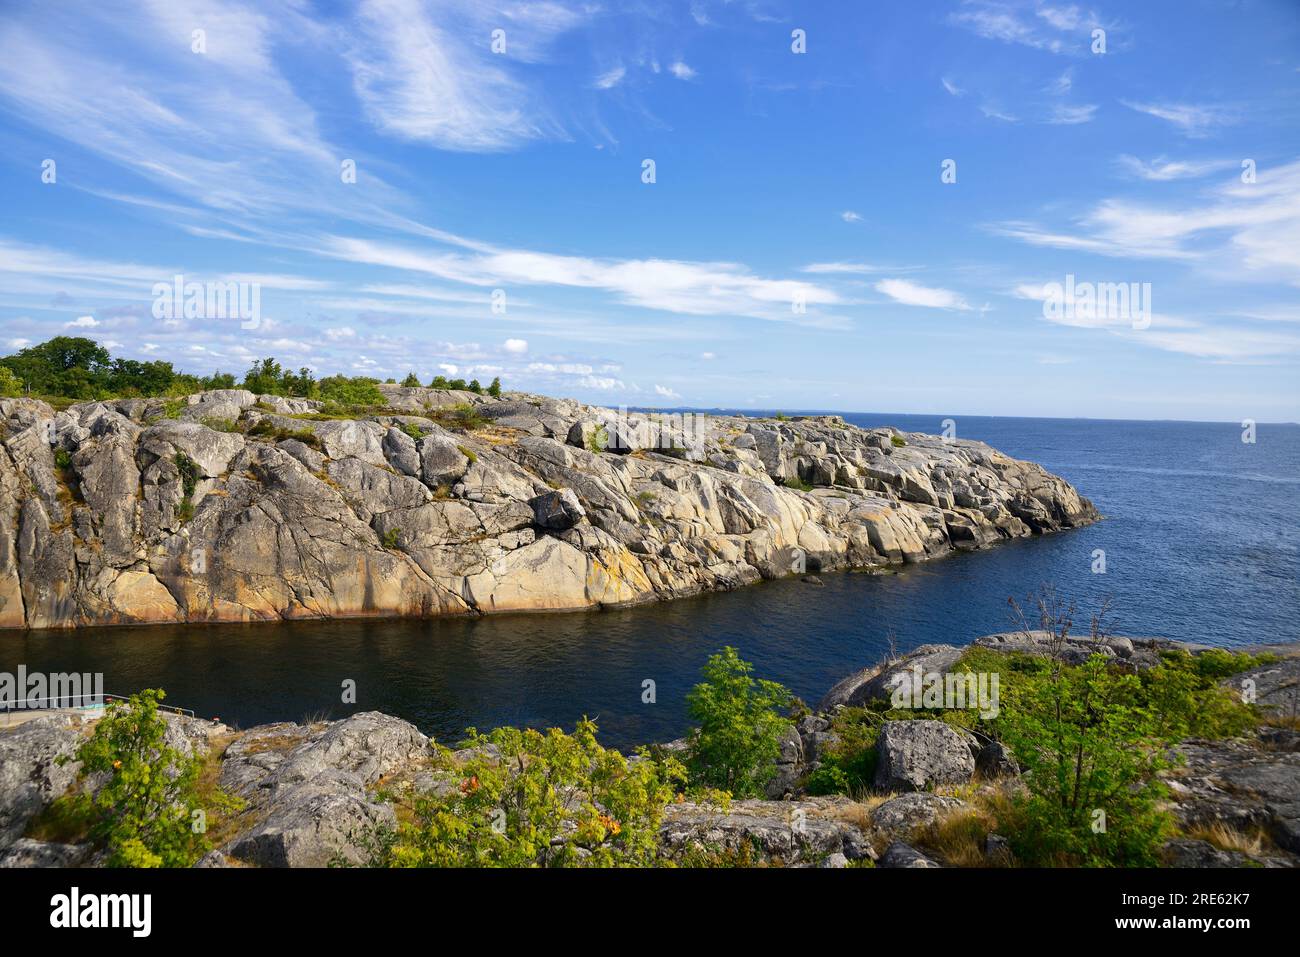 Western harbor on the island of Oja south of Stockholm - Sweden Stock Photo